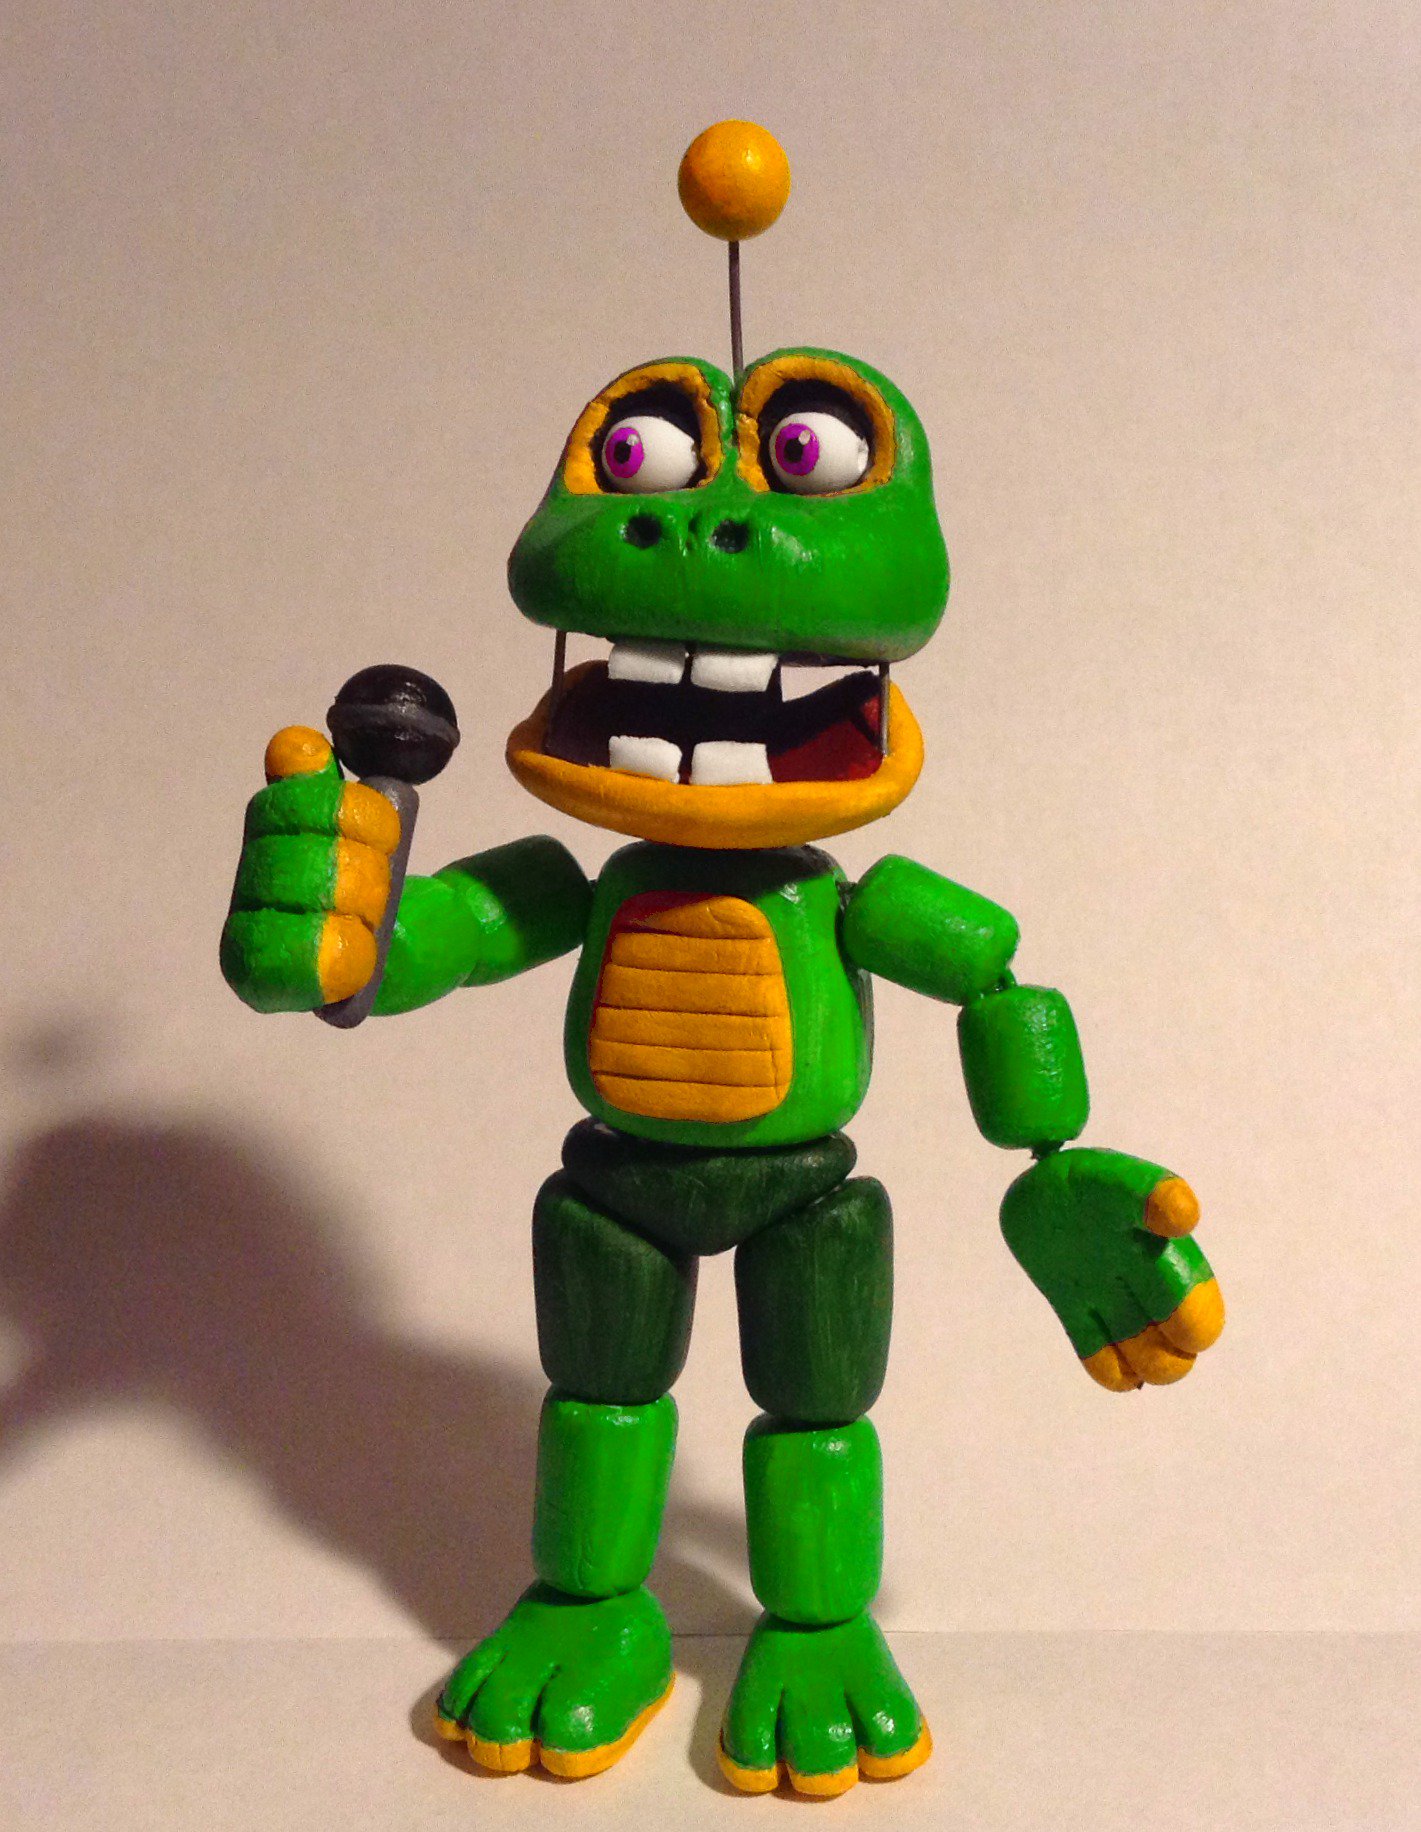 Happy Frog Five Nights At Freddy's